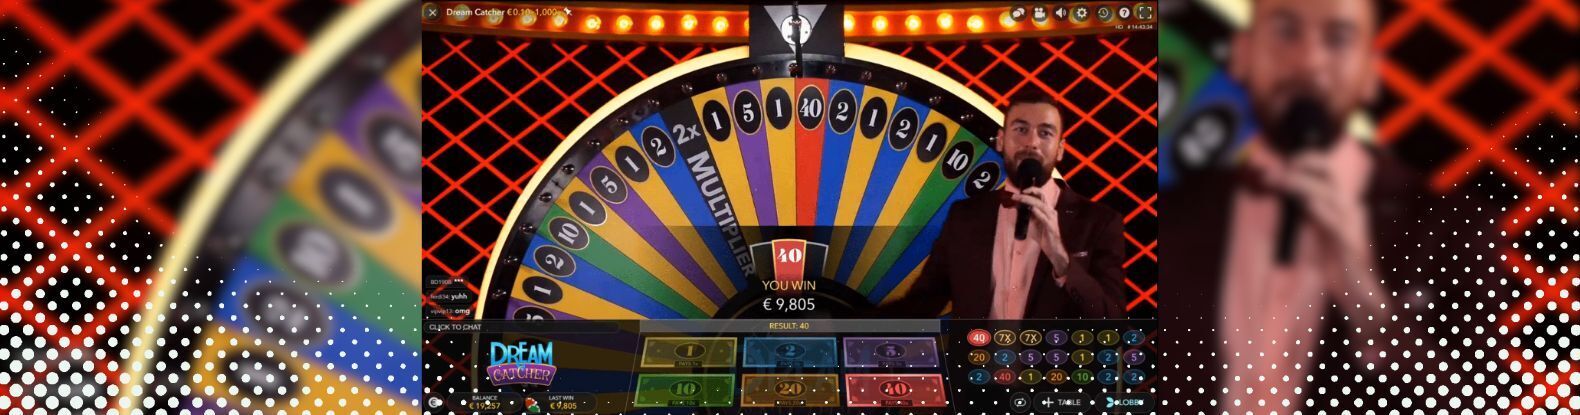 This is a screenshot of The Dream Catcher Casino Game by Evolution